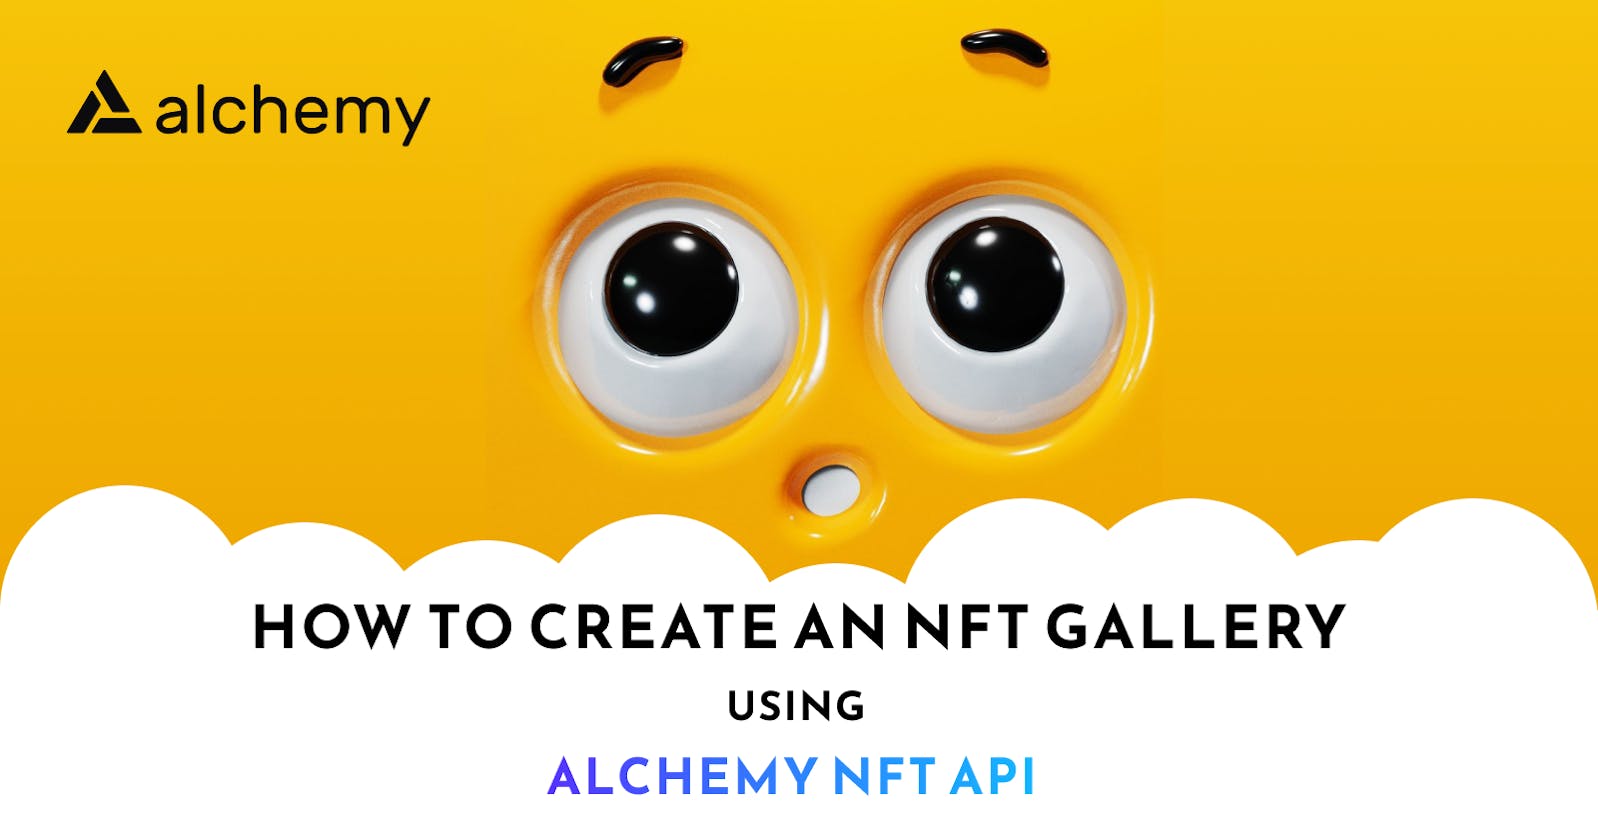 How To Create an NFT Gallery